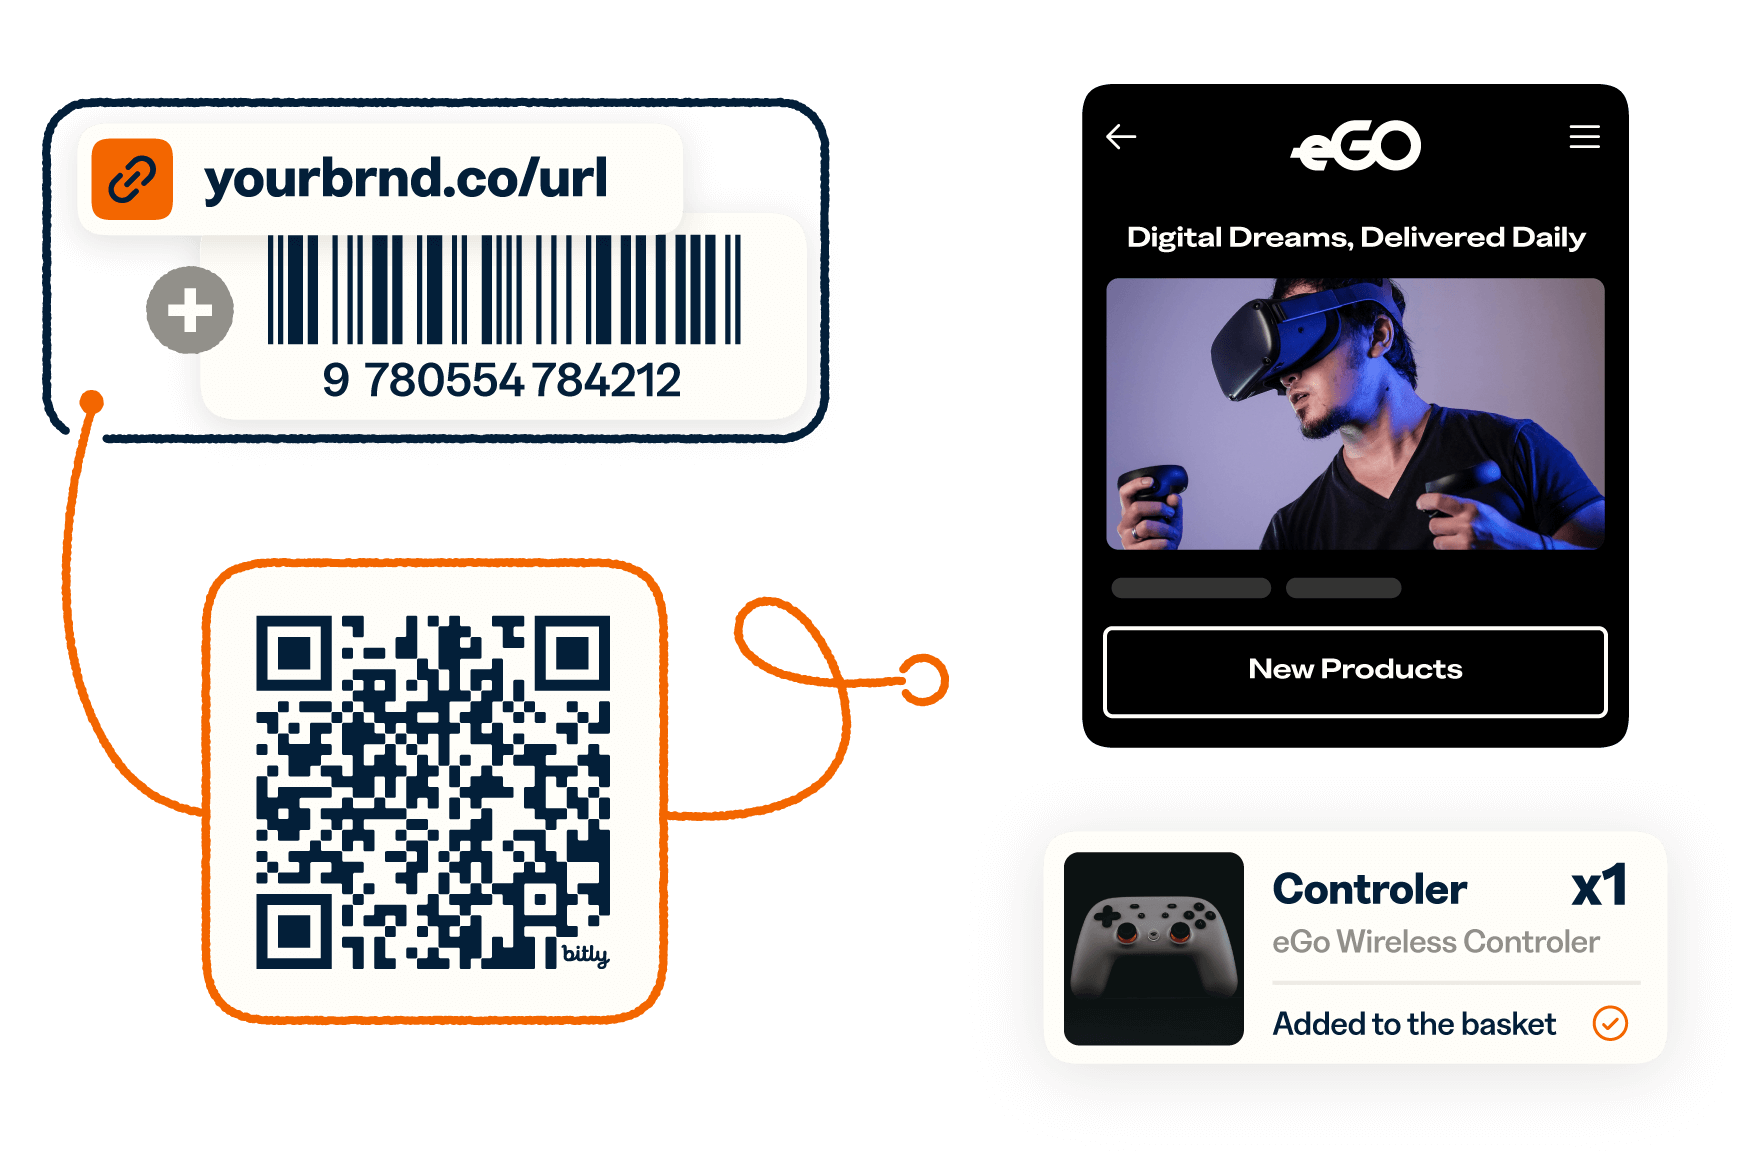 Short link and QR code to purchase controller